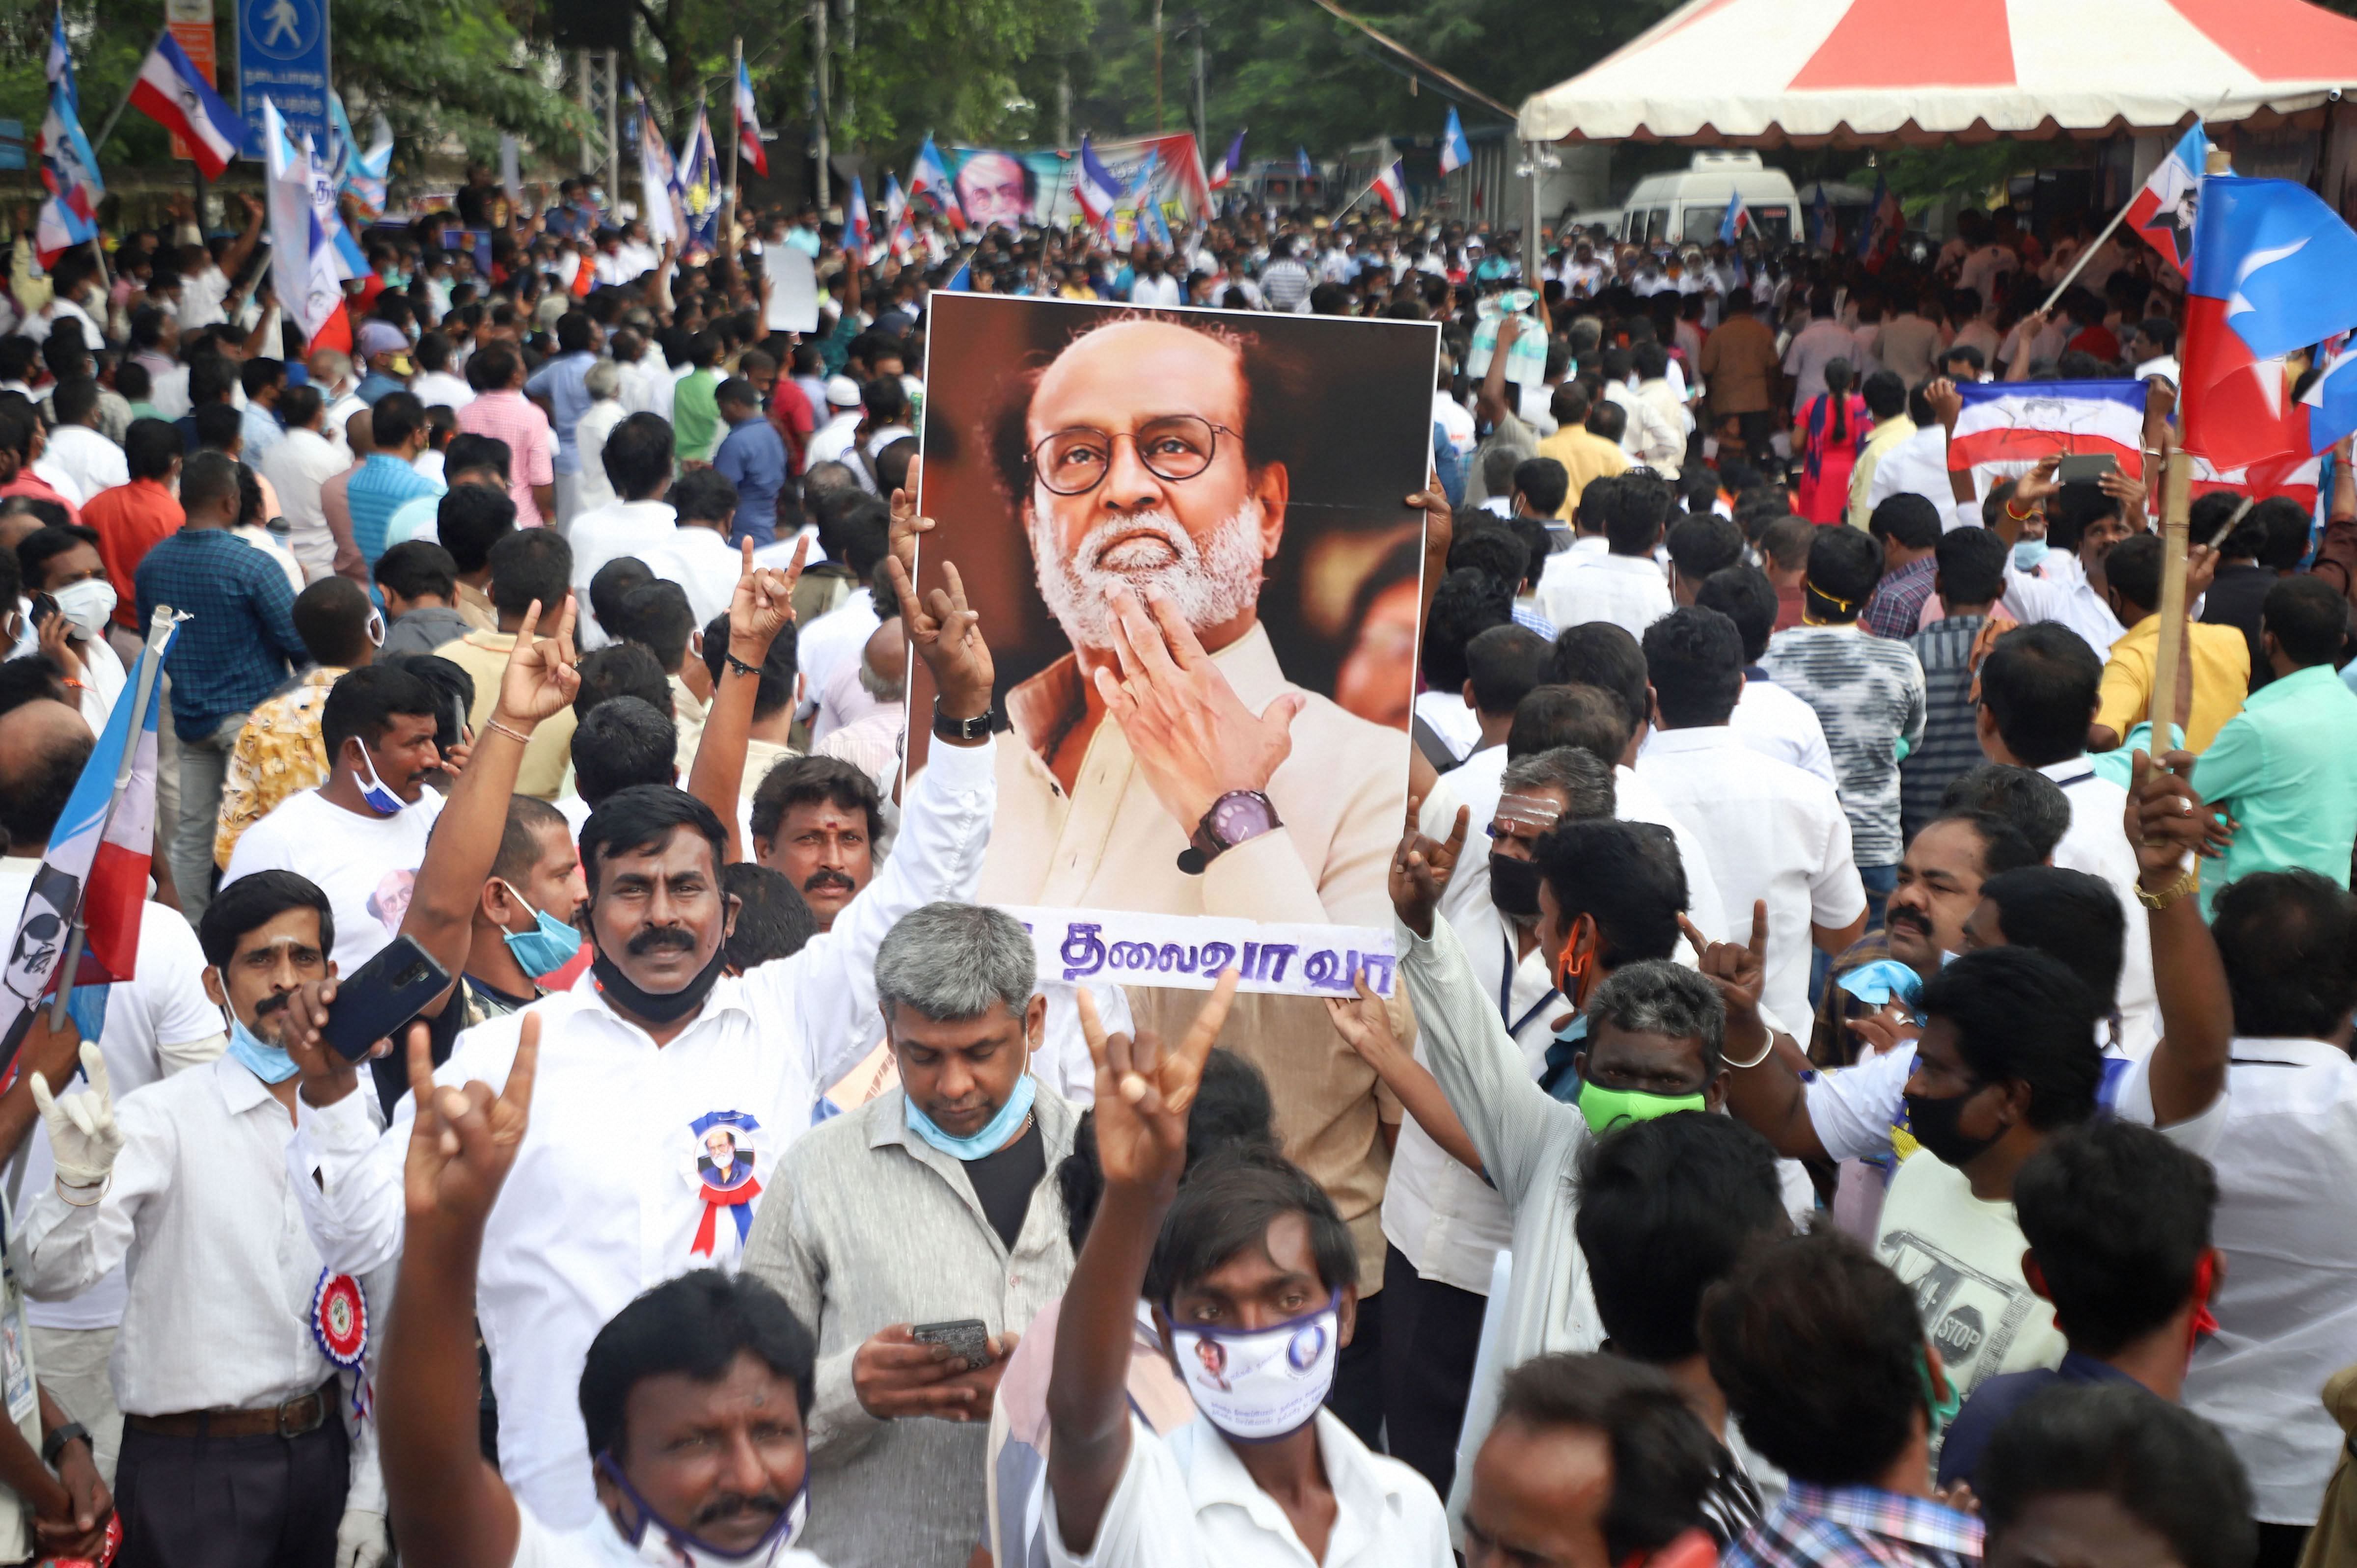 Fans of superstar Rajinikanth stage a demonstration demanding from him to join politics as earlier as promised, at Valluvar Kottam in Chennai, Sunday, Jan. 10, 2021. The actor, who finally appeared ready to launch his political party with a "now or never" announcement about a month ago, has now decided to opt for the latter course, citing health concerns. Credit: PTI Photo